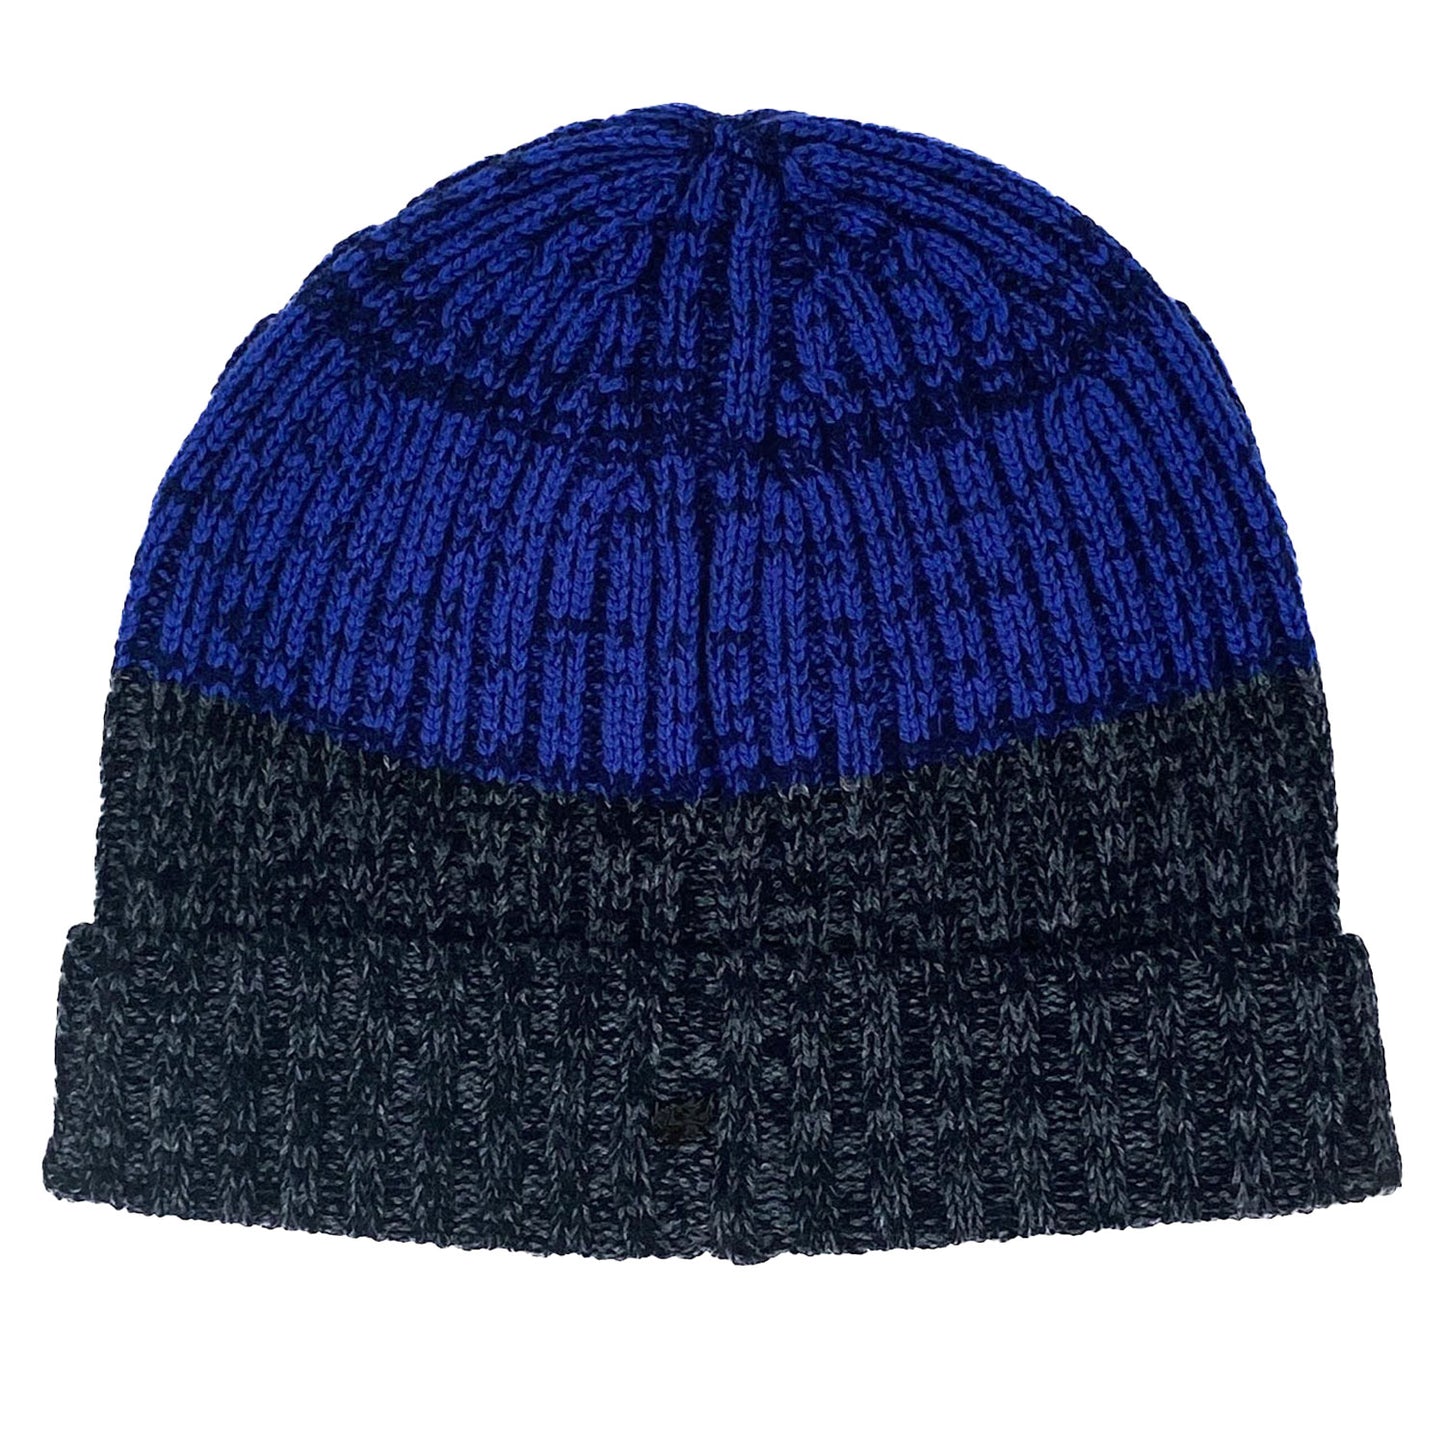 Benny Beanie in Blue/Charcoal